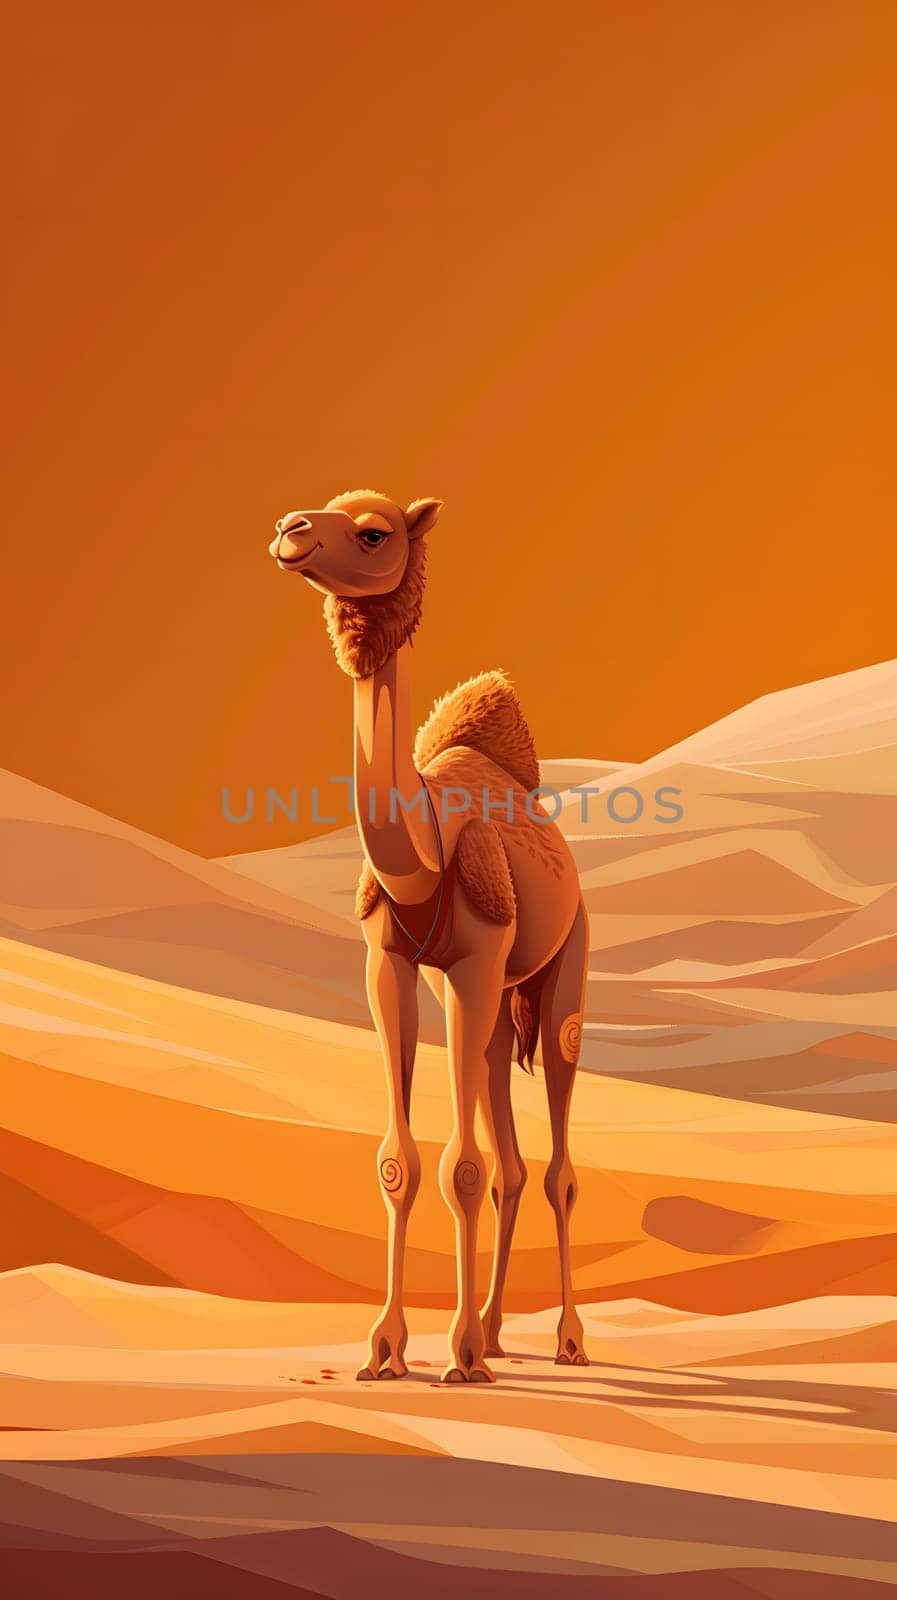 A camelid stands gracefully in the erg desert landscape by Nadtochiy